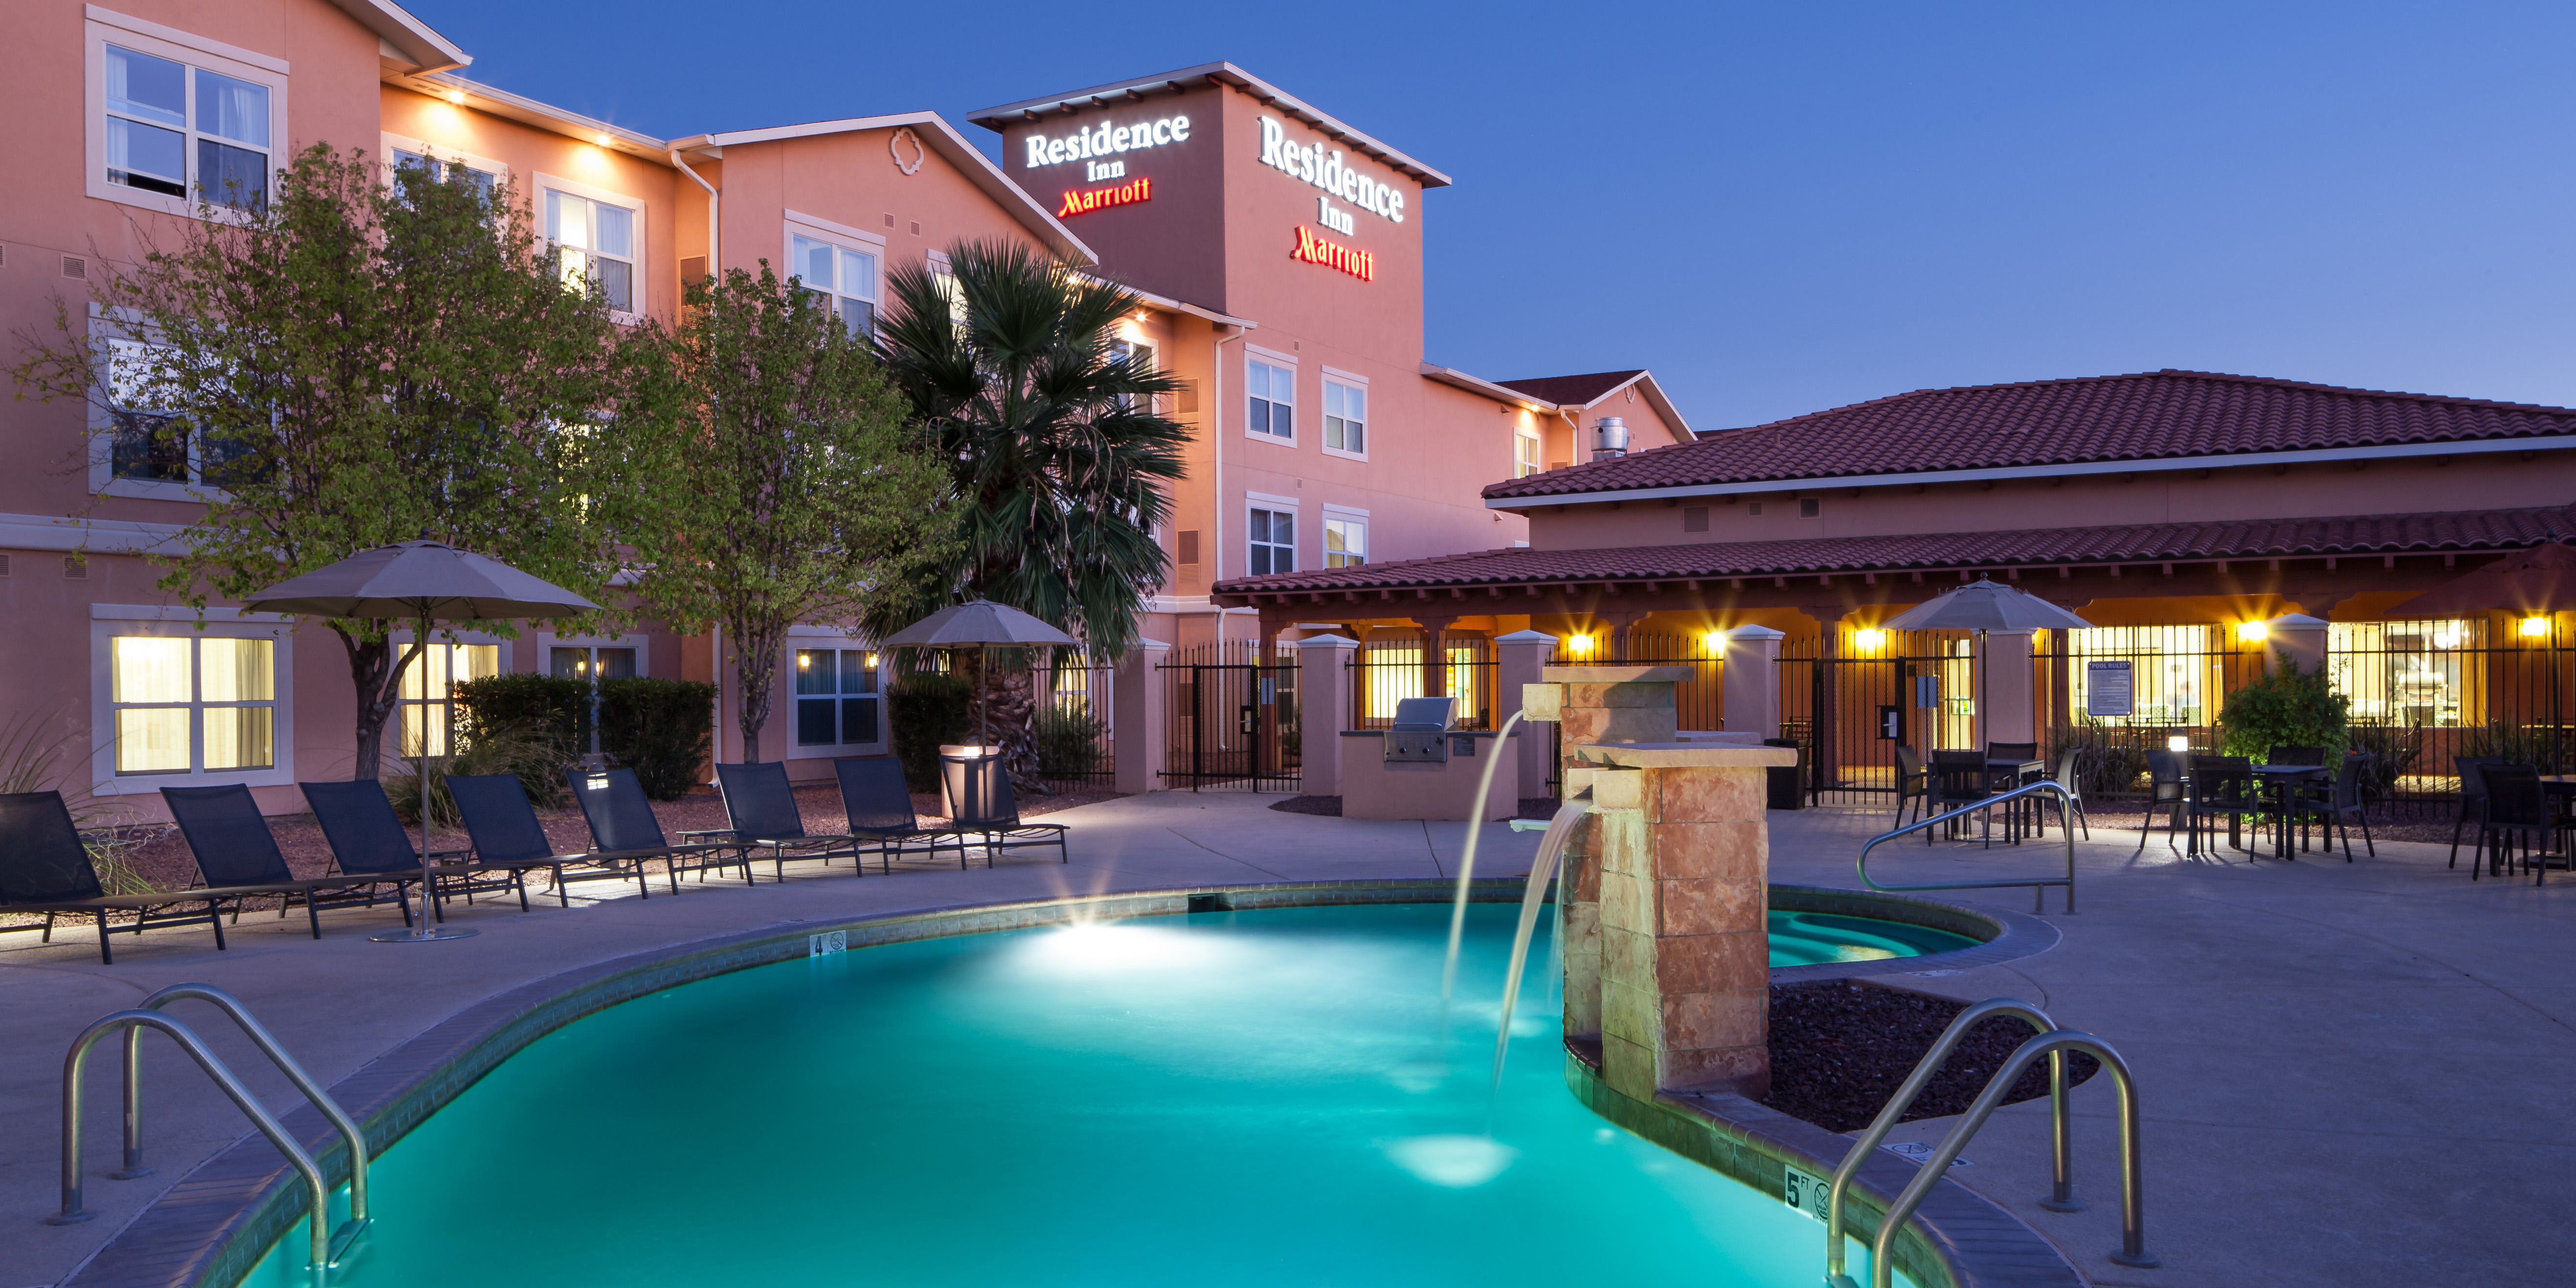 There's a modern, fresh new look at the Residence Inn Tucson Airport with amenities for millennial travelers.